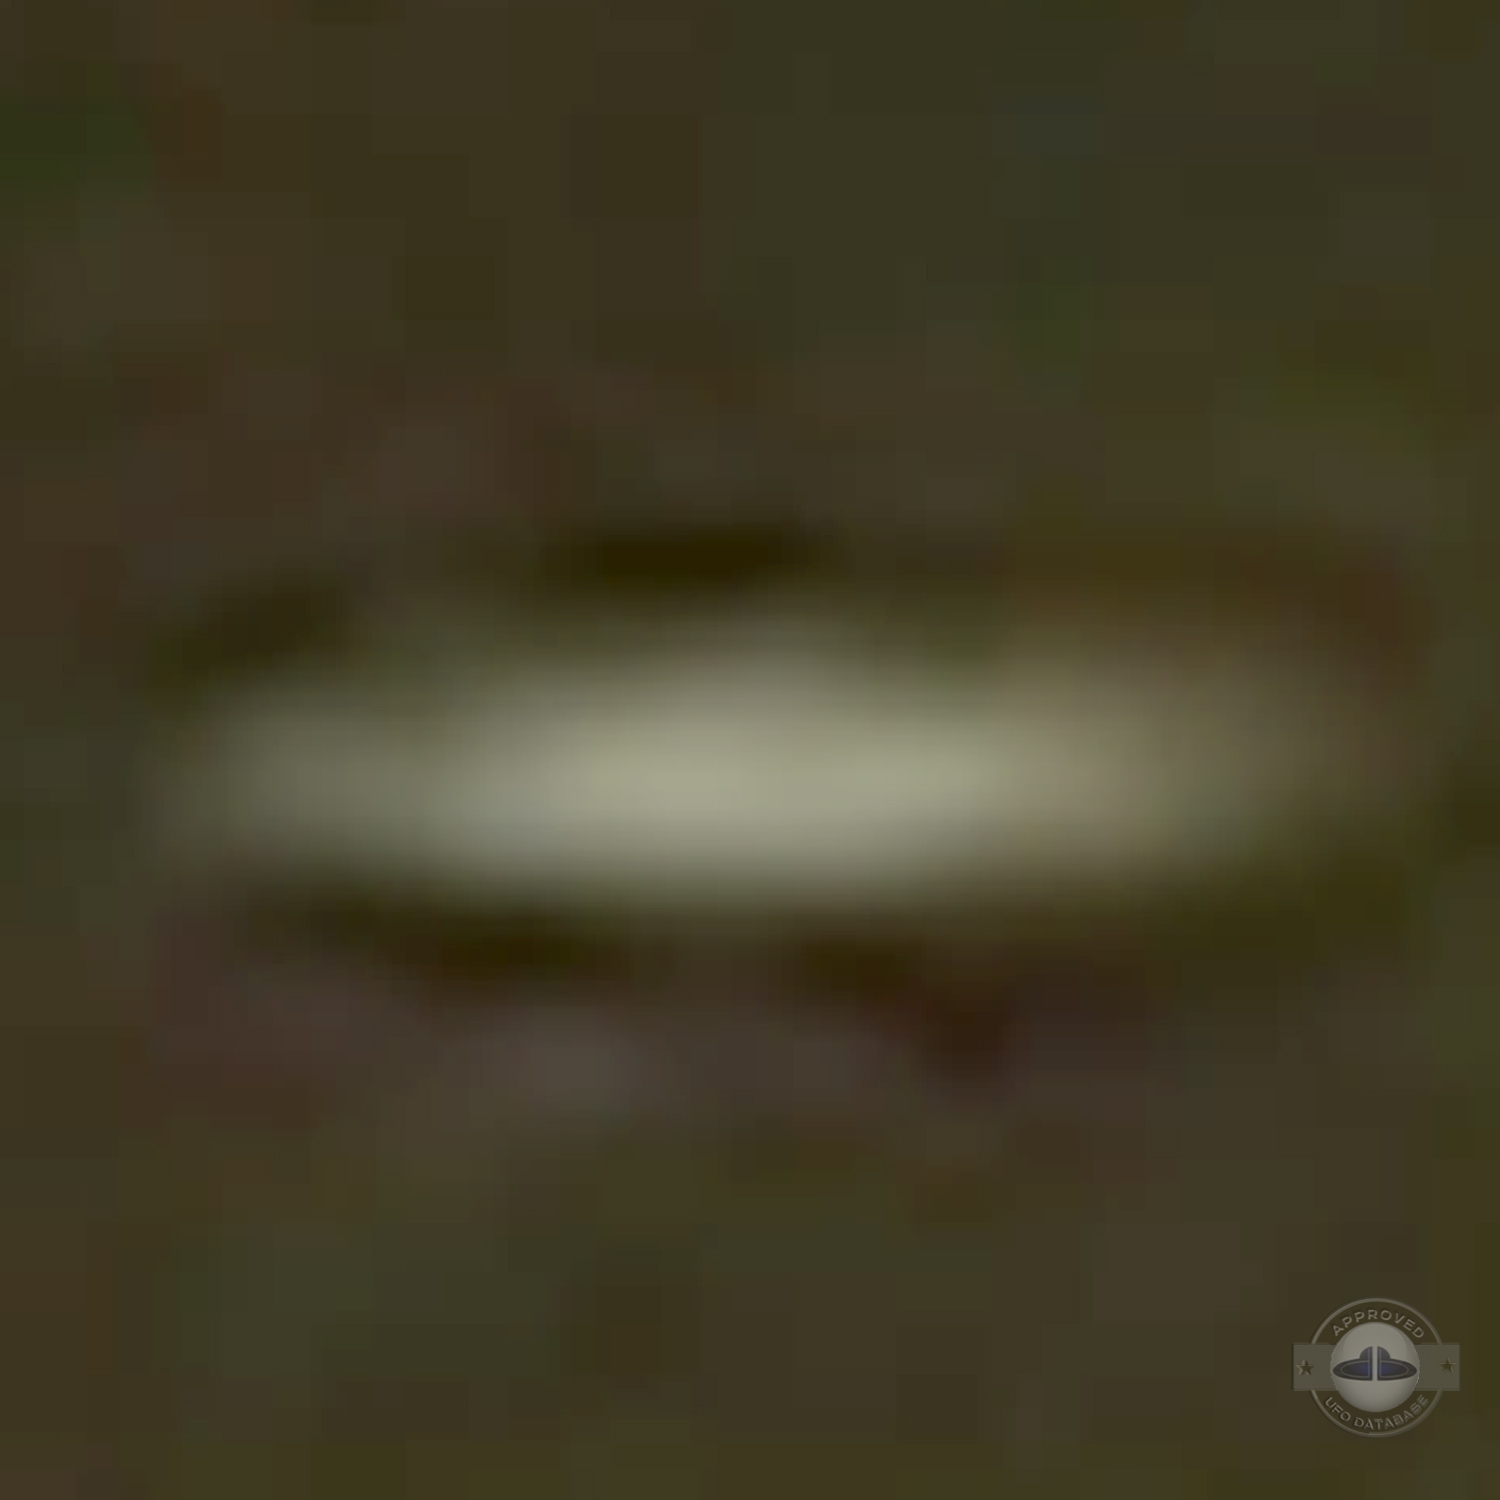 Brazil UFO Sighting | UFO picture captured from bedroom window | 2011 UFO Picture #169-8